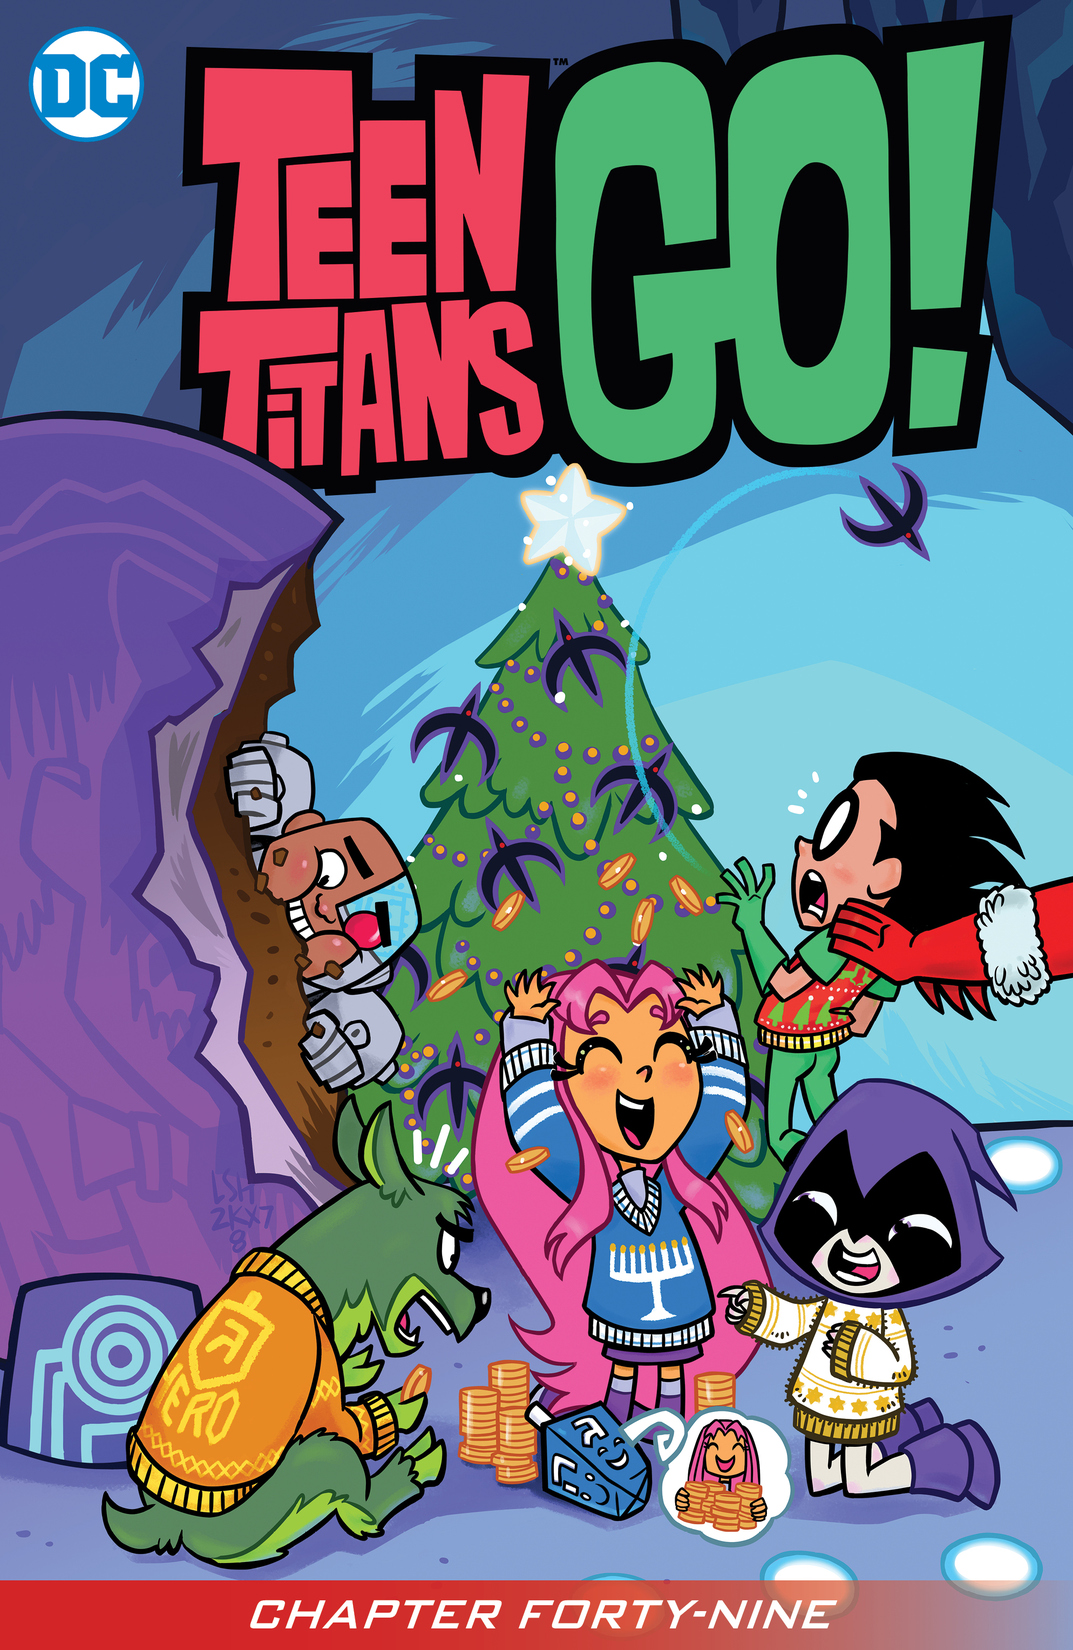 Teen Titans Go! (2013-) #49 preview images